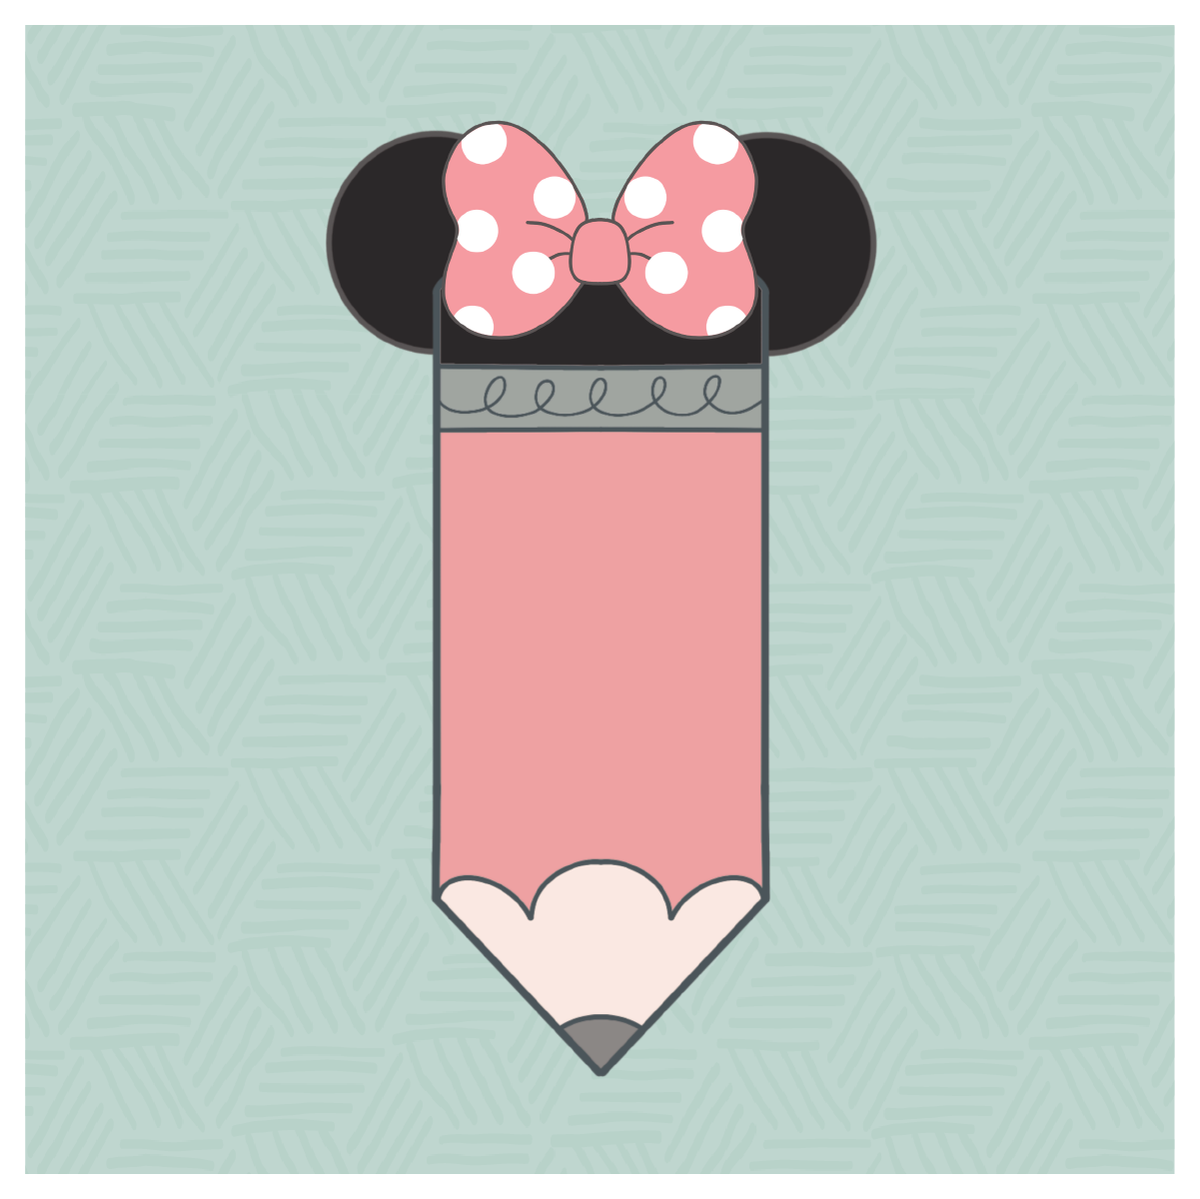 Mouse Ear Pencil with Bow Cookie Cutter